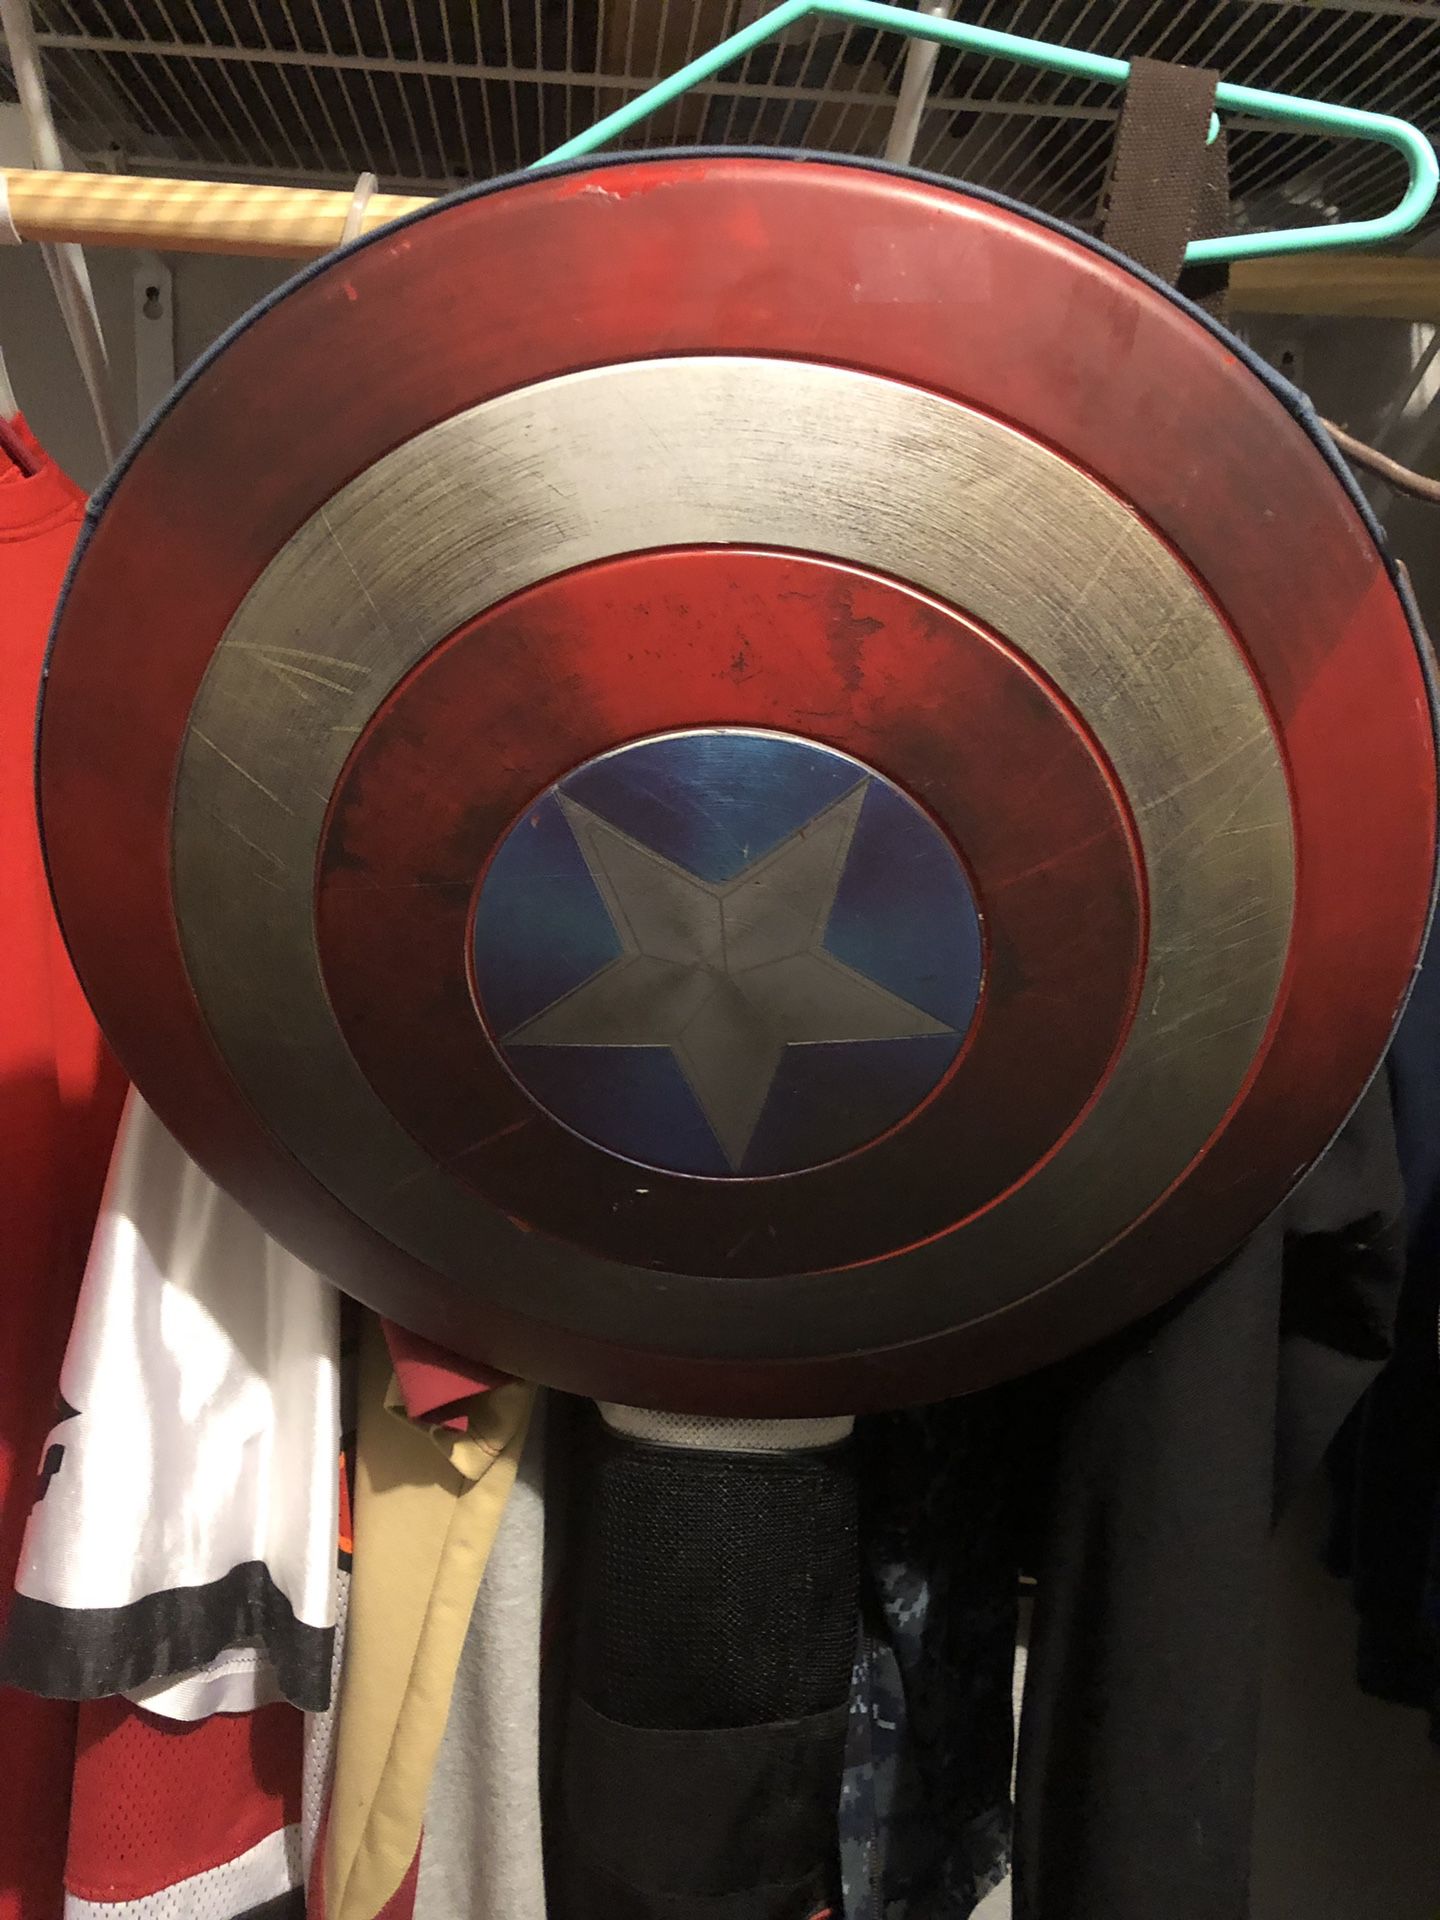 Captain America armored riding pack